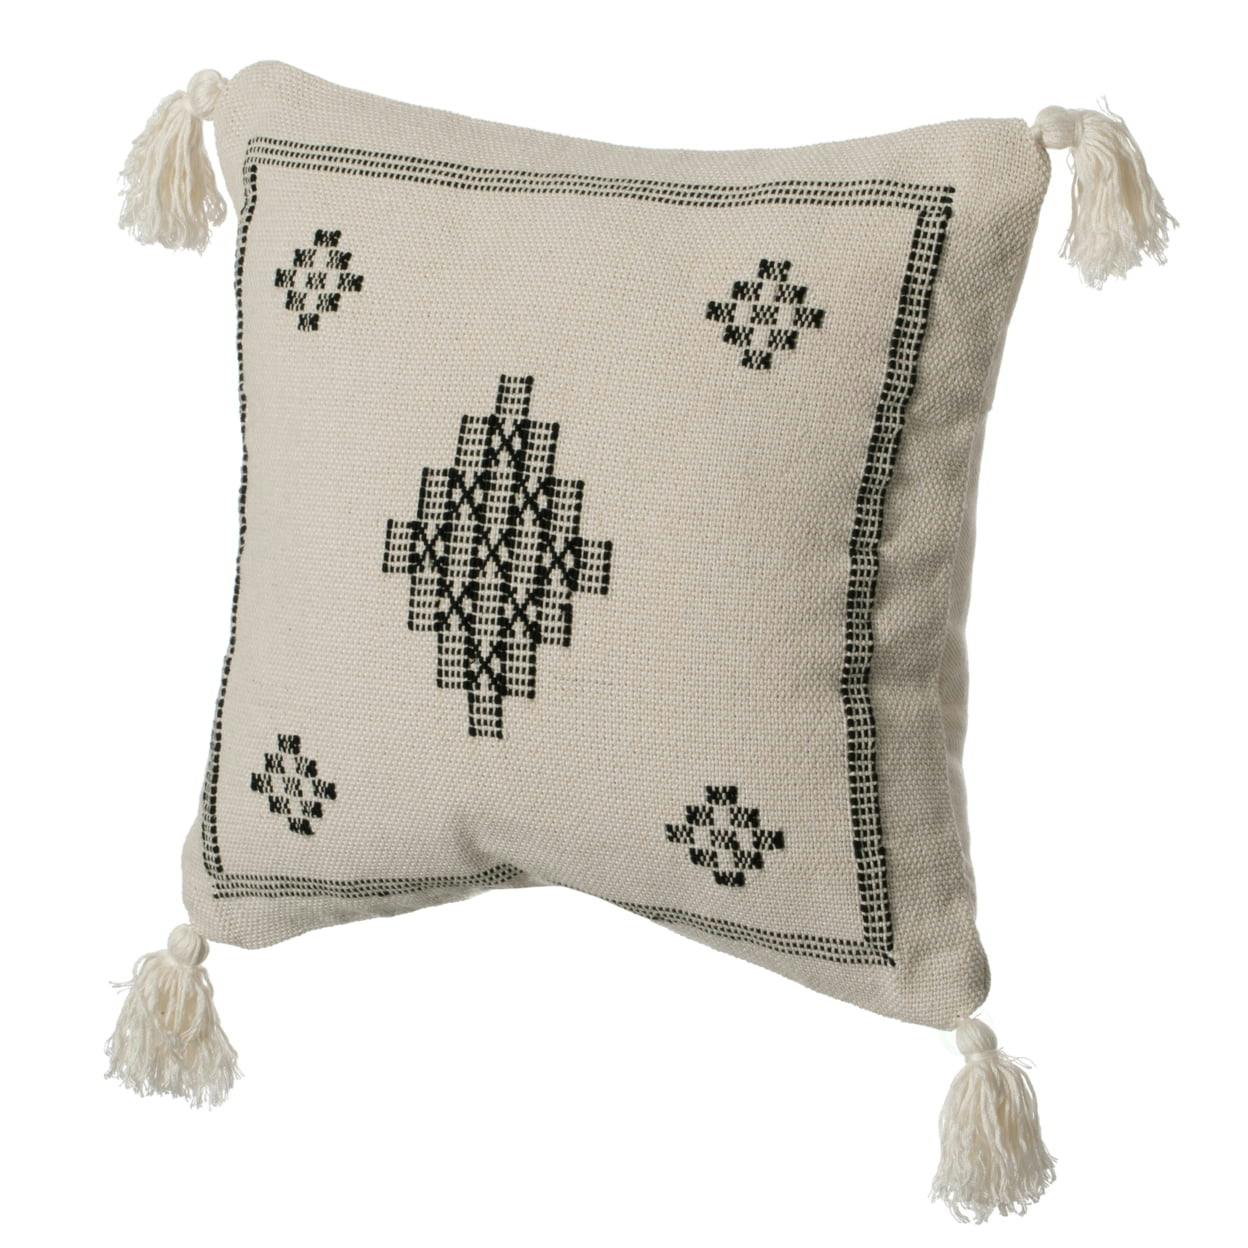 Bohemian 16" Black Cotton Throw Pillow Cover with Tribal Tassels